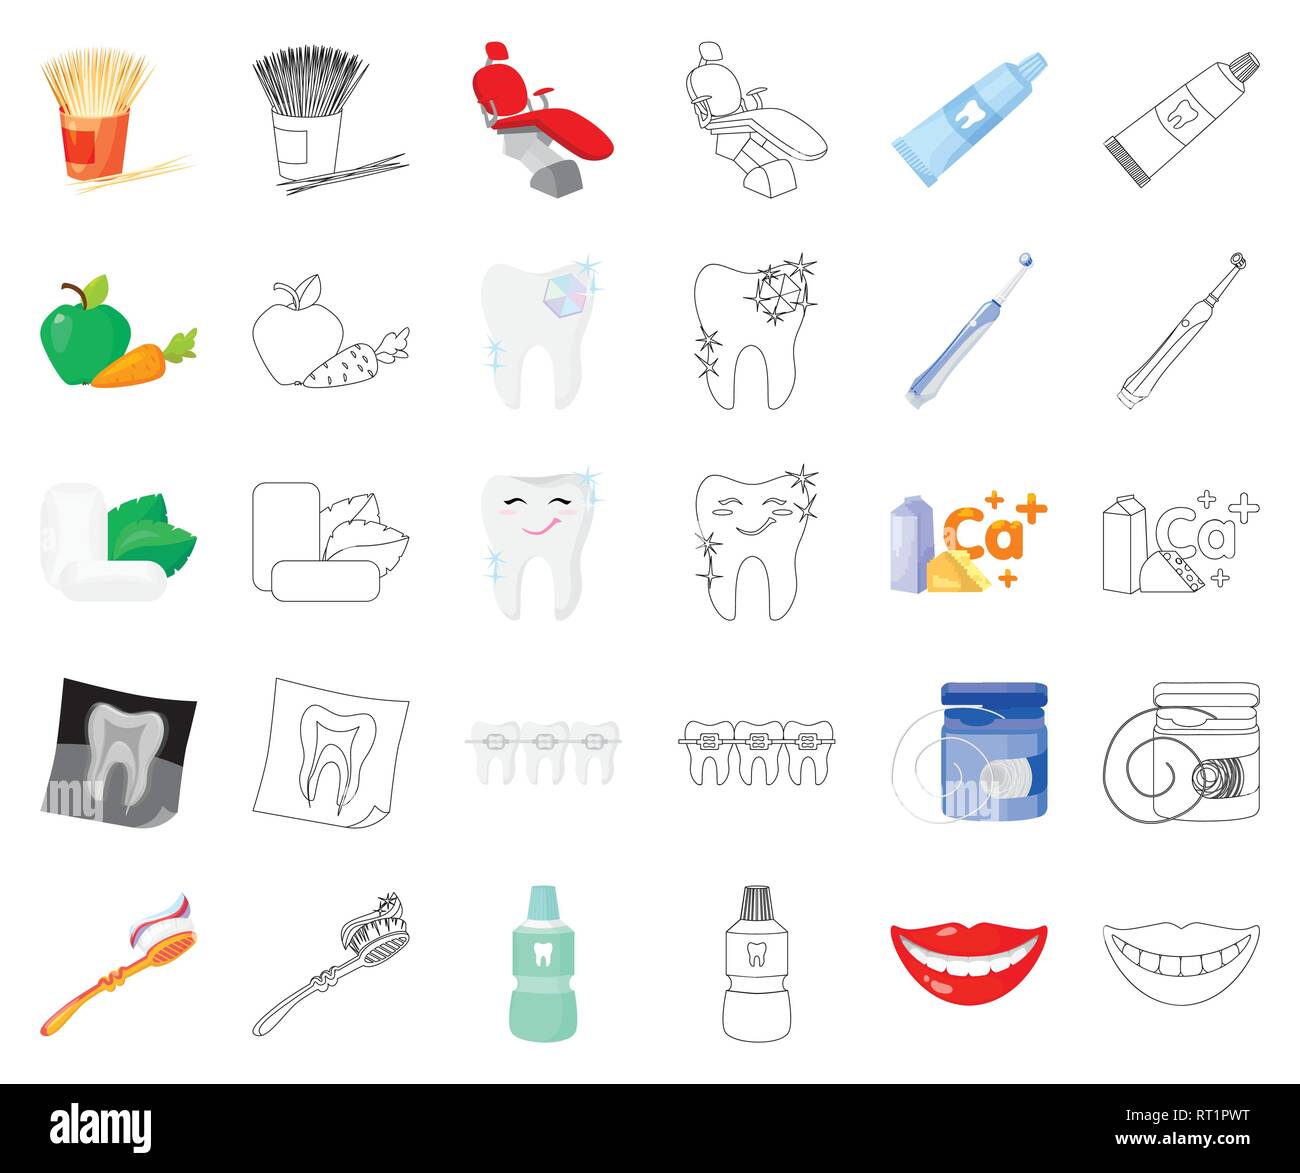 adaptation,apple,art,bottle,braces,calcium,care,carrot,cartoon,outline ,chair,chewing,clinic,collection,dental,dentist,dentistry ,design,diamond,doctor,electric,equipment ,floss,gum,hygiene,icon,illustration,instrument,isolated,logo,medicine,mouthwash,ray  ...